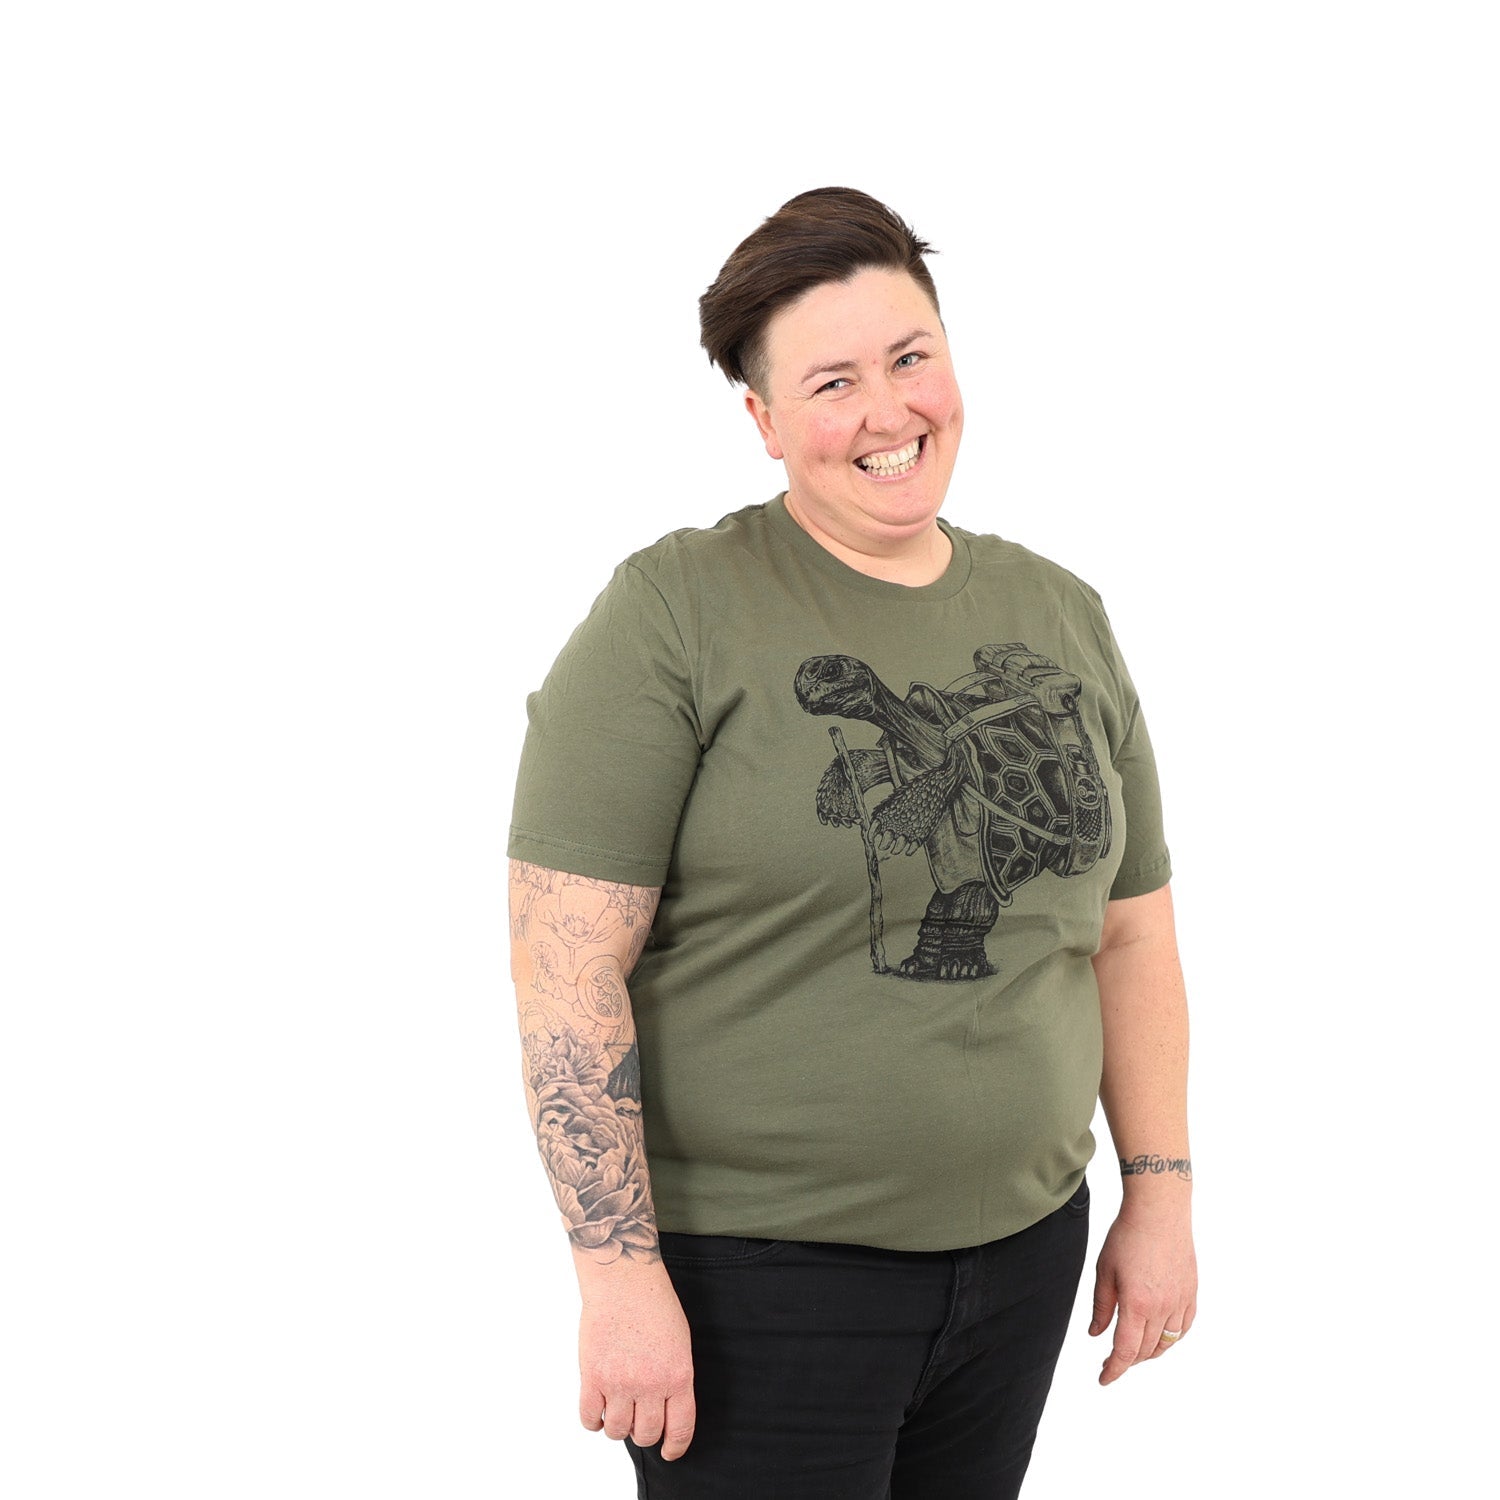 woman with short hair smiling with a white background while wearing an army green shirt with a screen printed tortoise standing upright wearing a back pack holding a walking stick